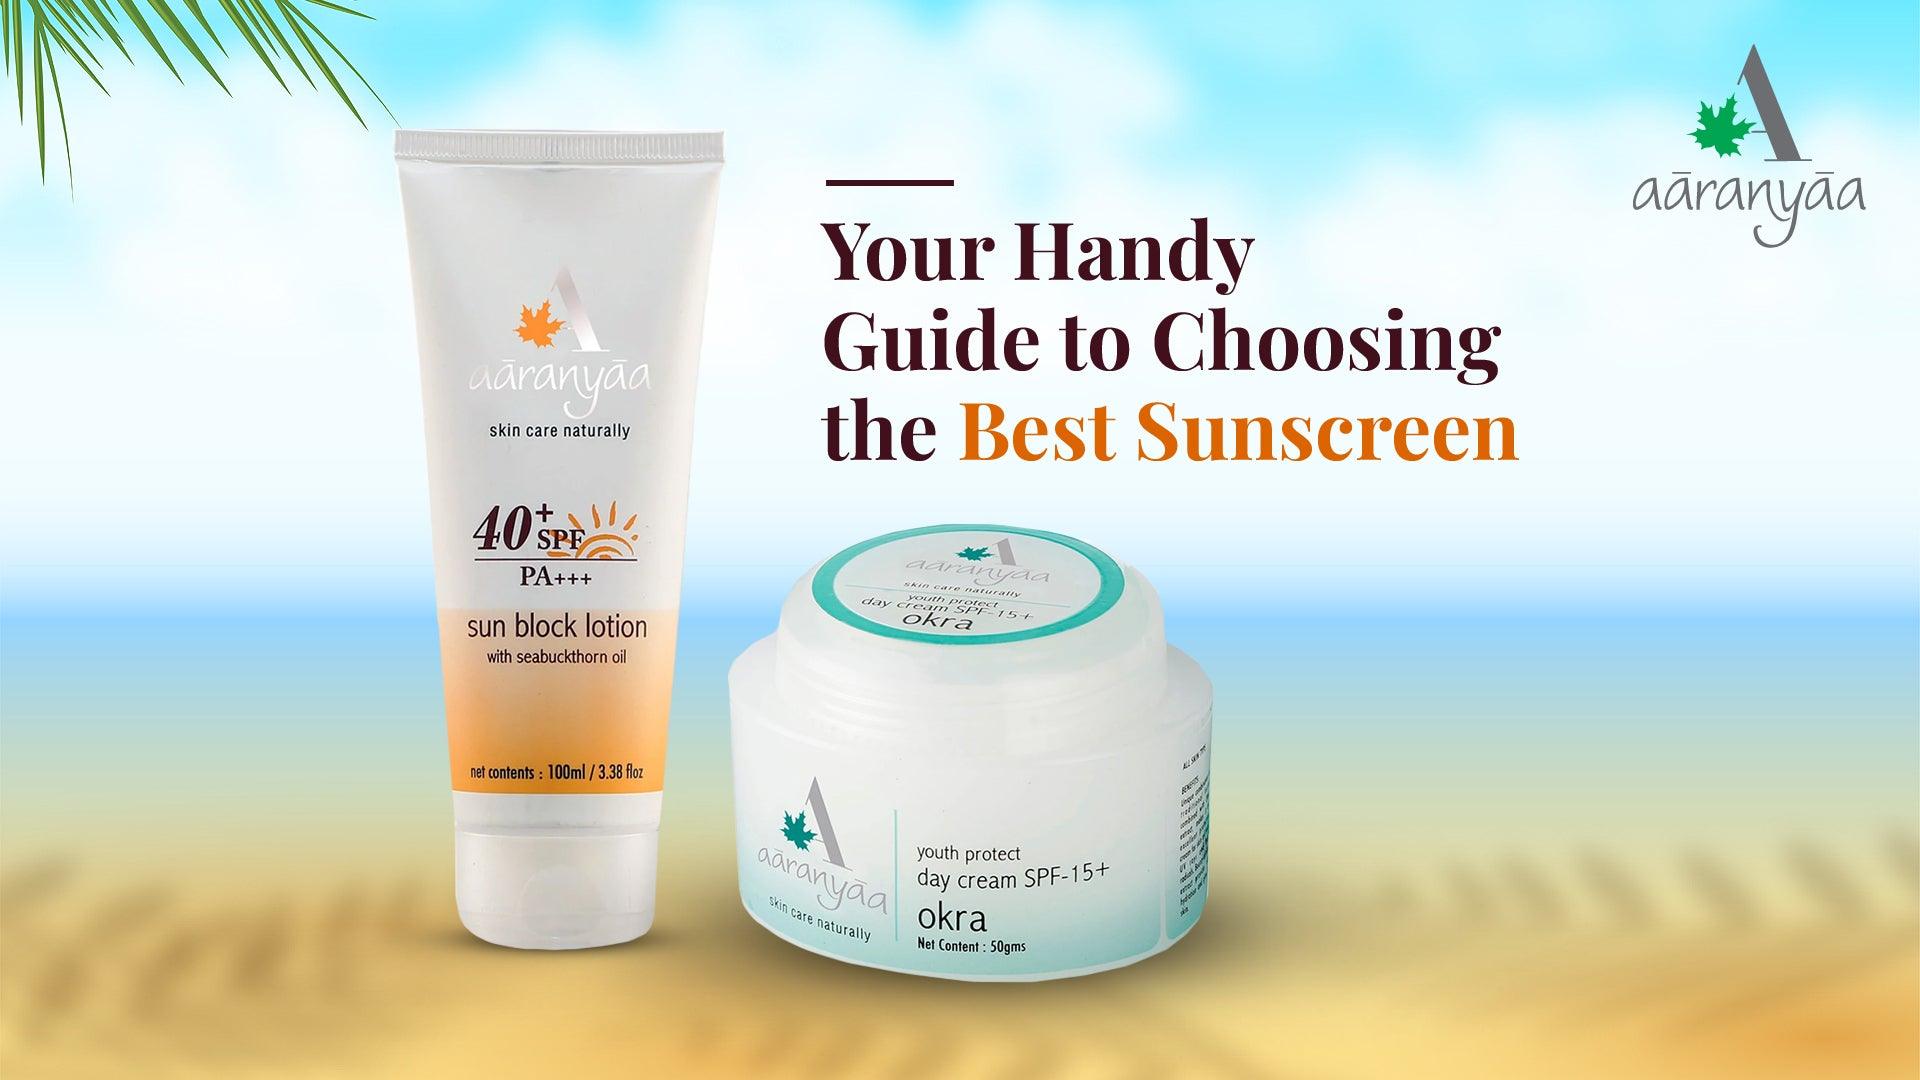 Your Handy Guide to Choosing the Best Sunscreen - aaranyaa skincare